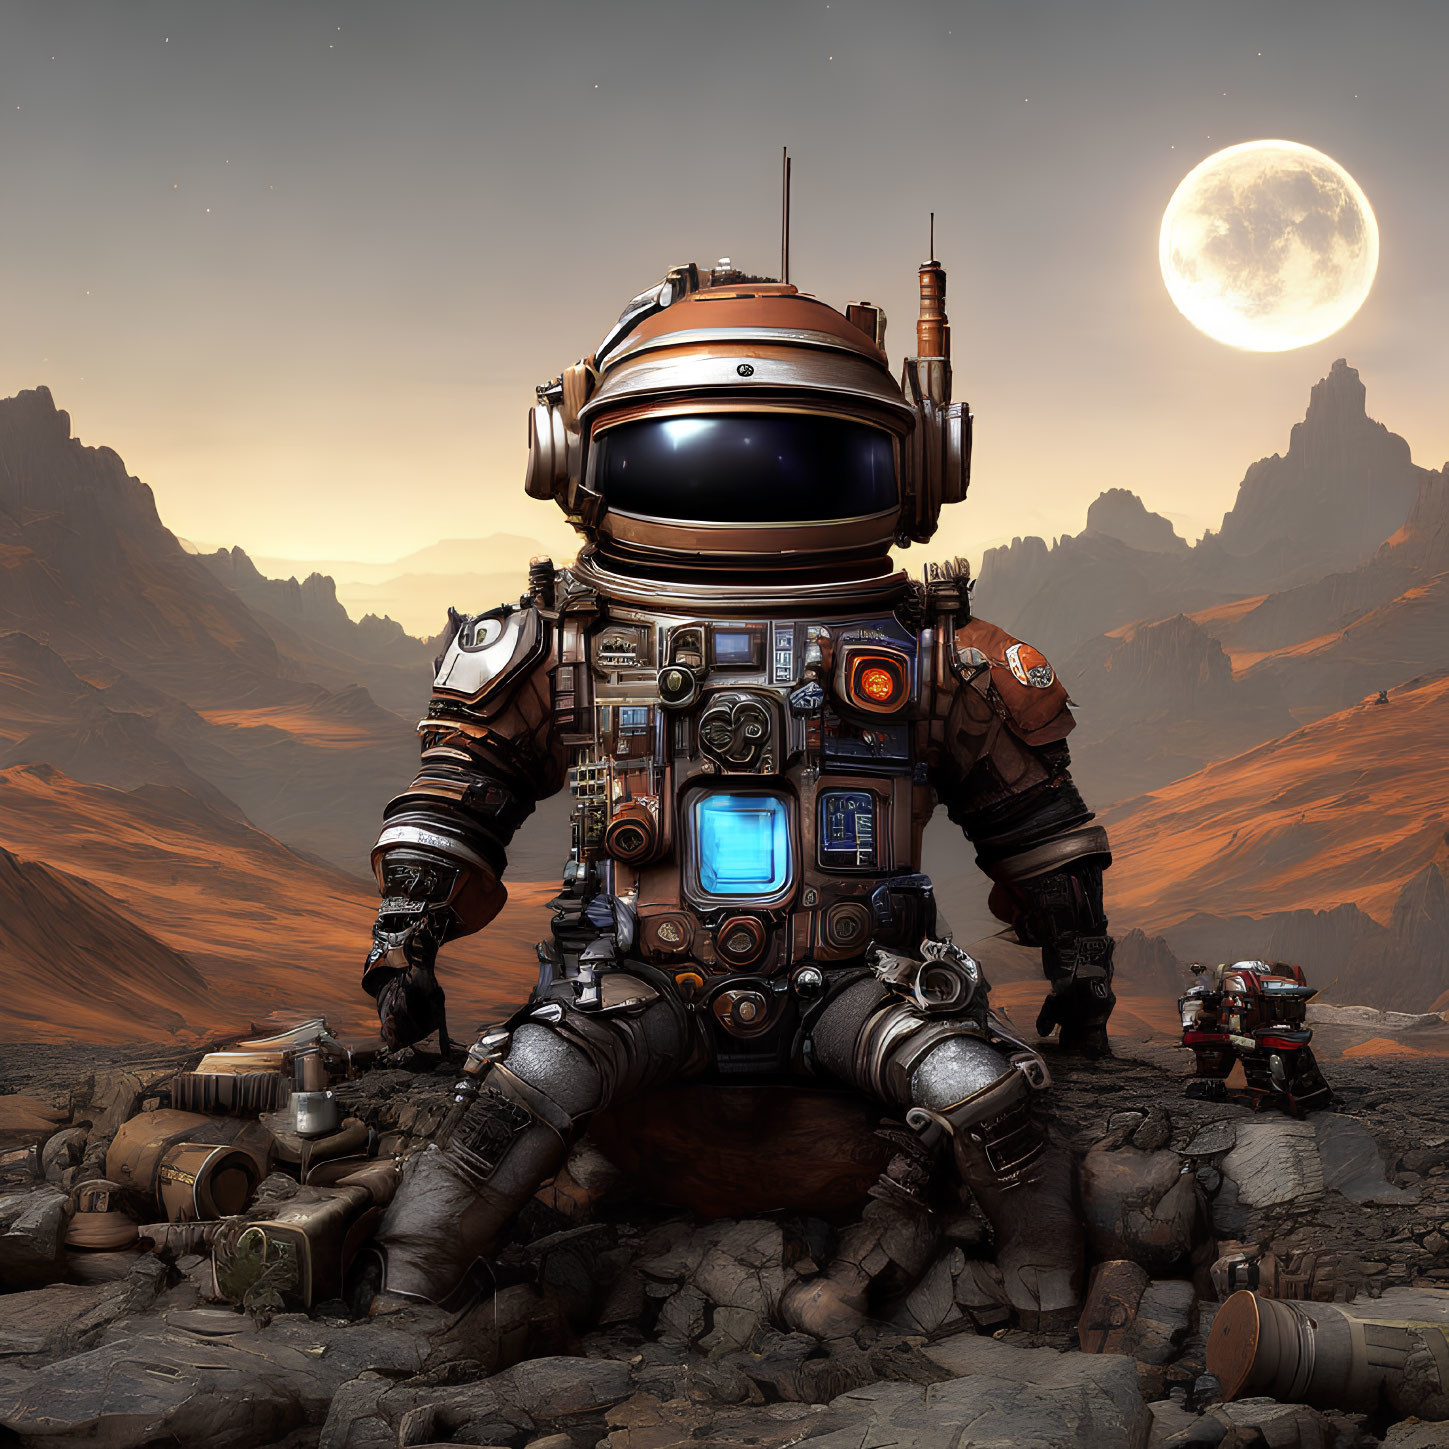 Detailed Astronaut in Robotic Suit on Mars-like Terrain with Rover and Moon in Sky